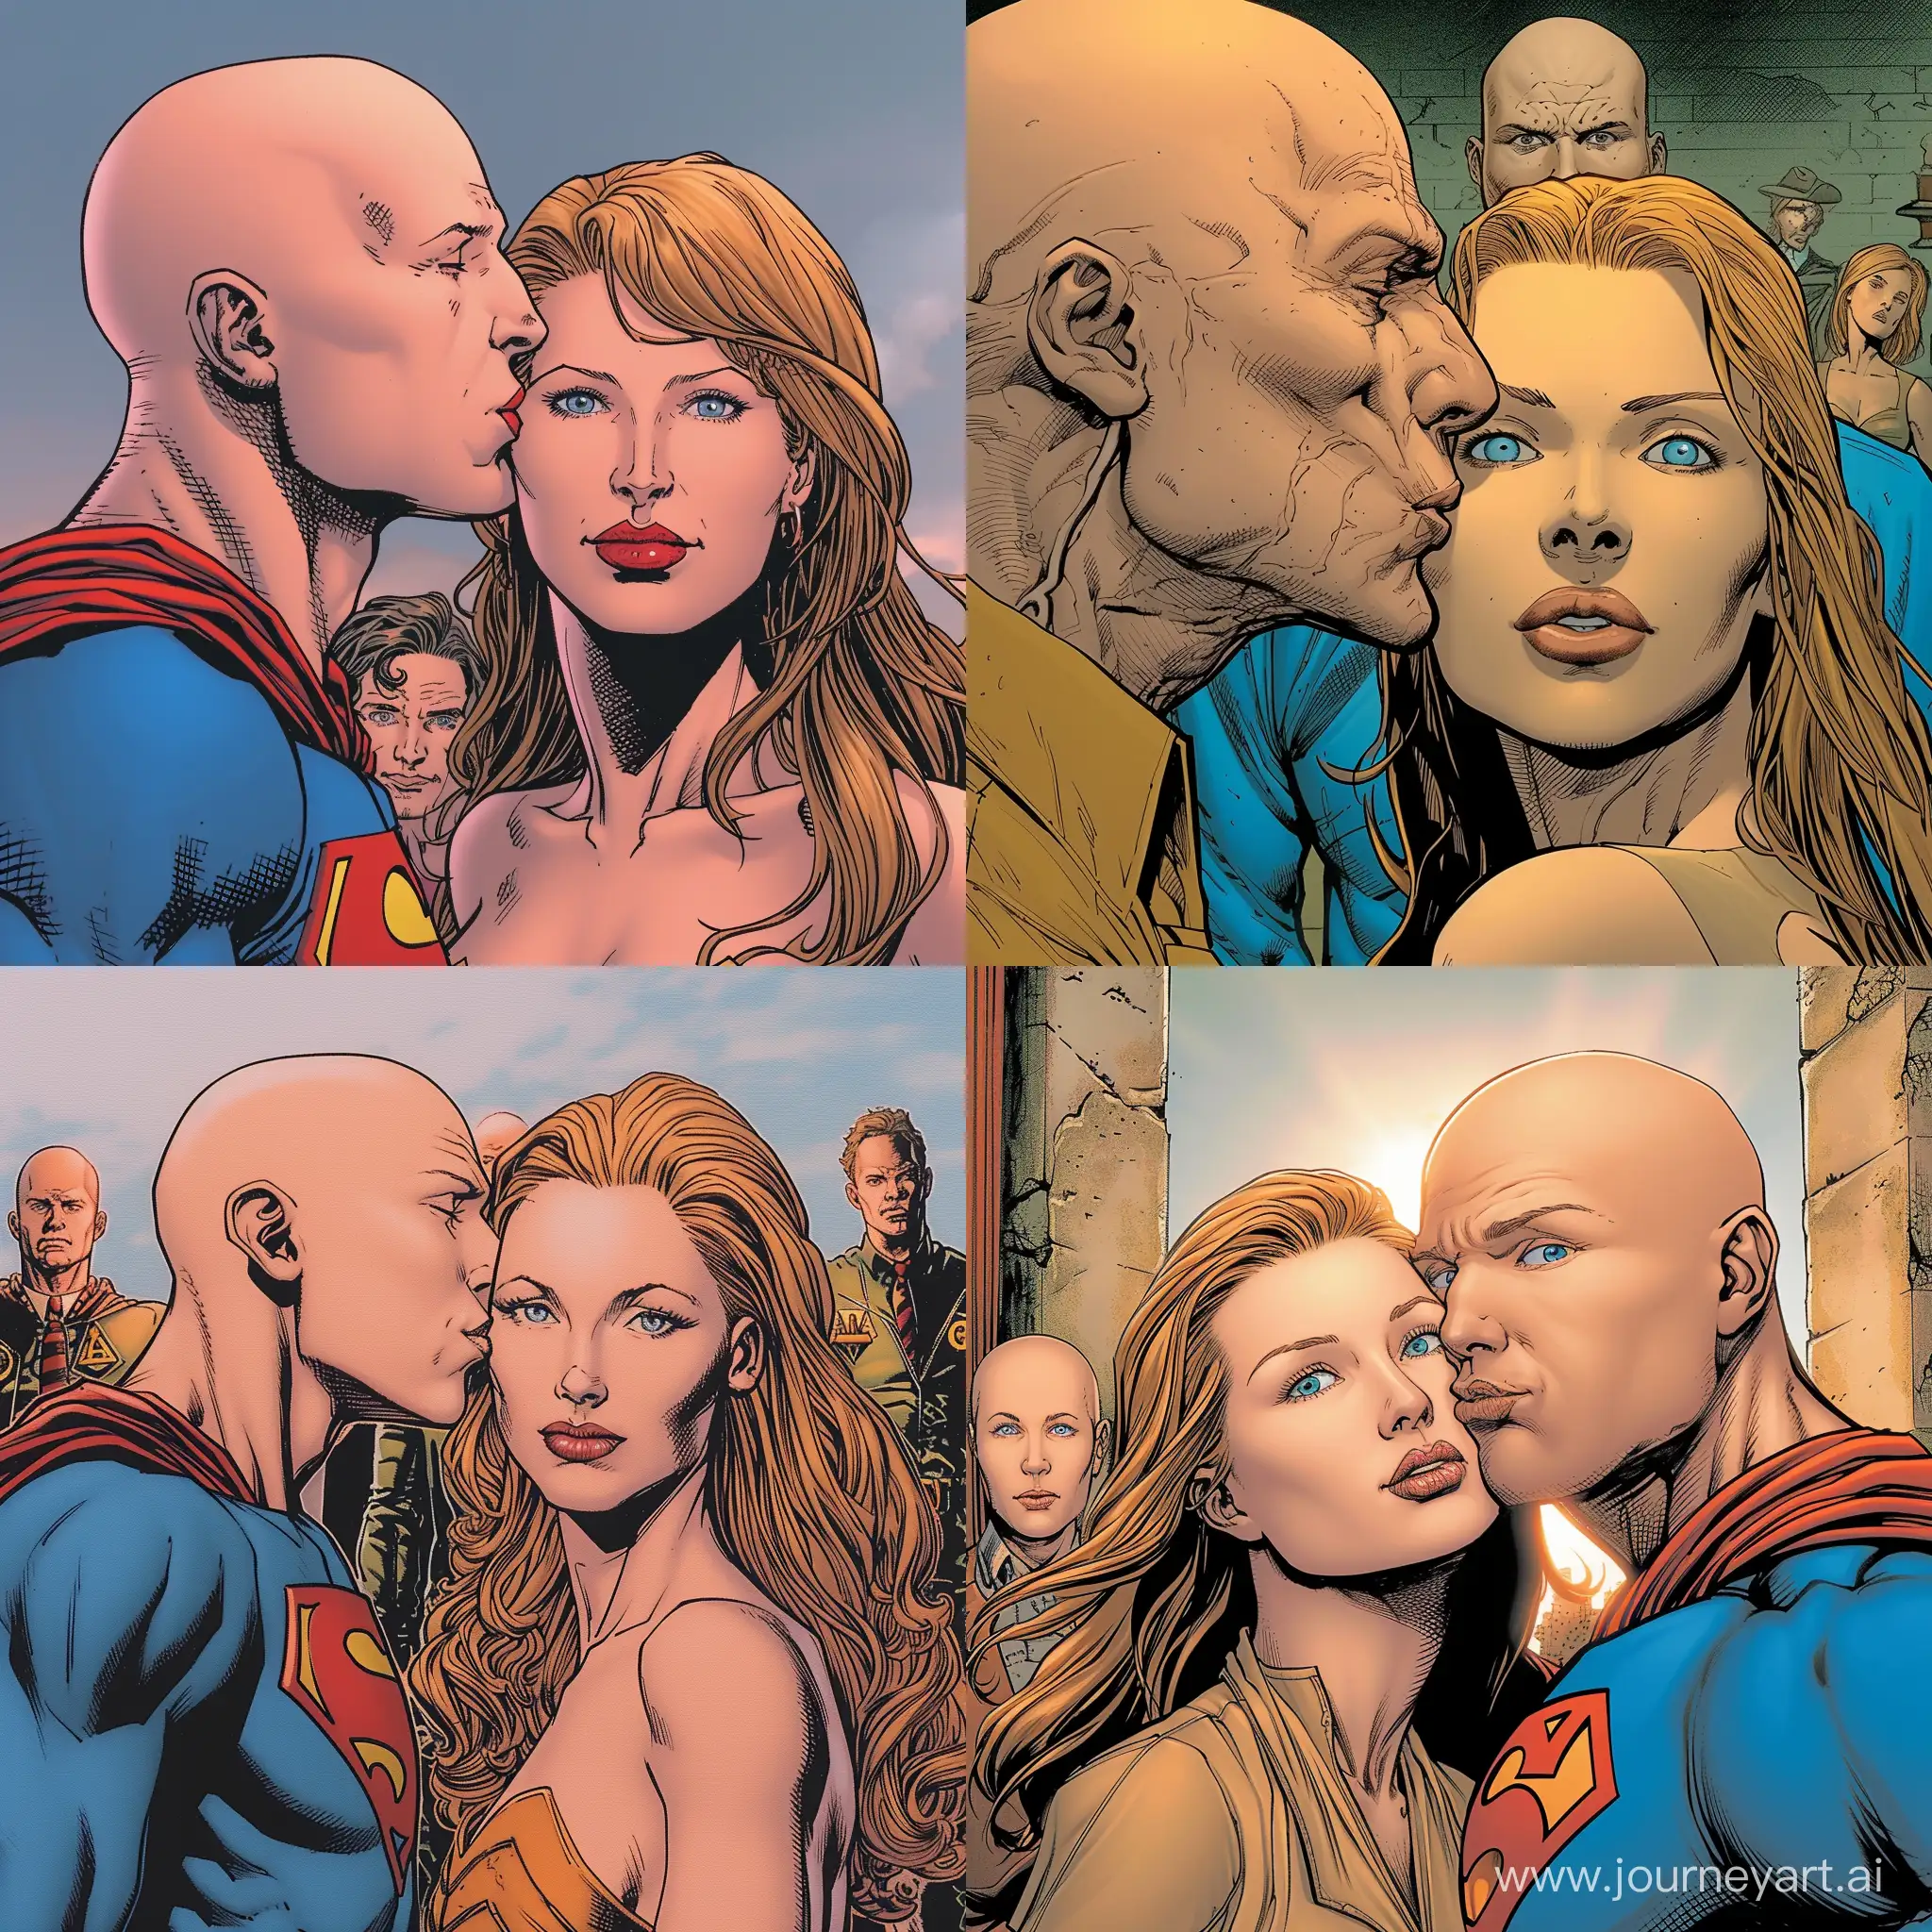 Michael-Rosenbaum-as-Lex-Luthor-Kissing-a-Woman-While-Being-Watched-in-Horror